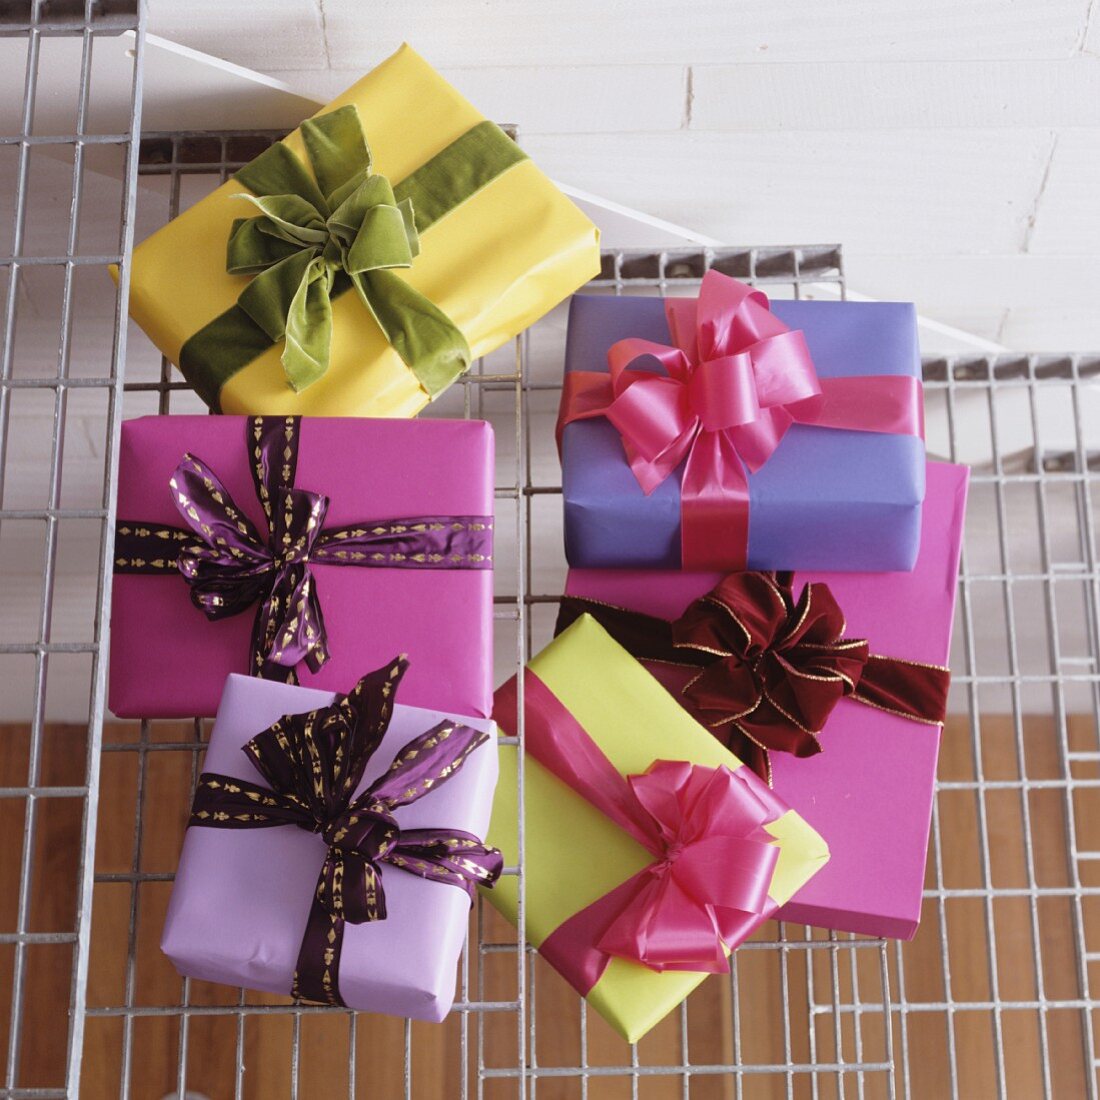 Presents wrapped in plain paper with large bows on white, metal lattice stair treads